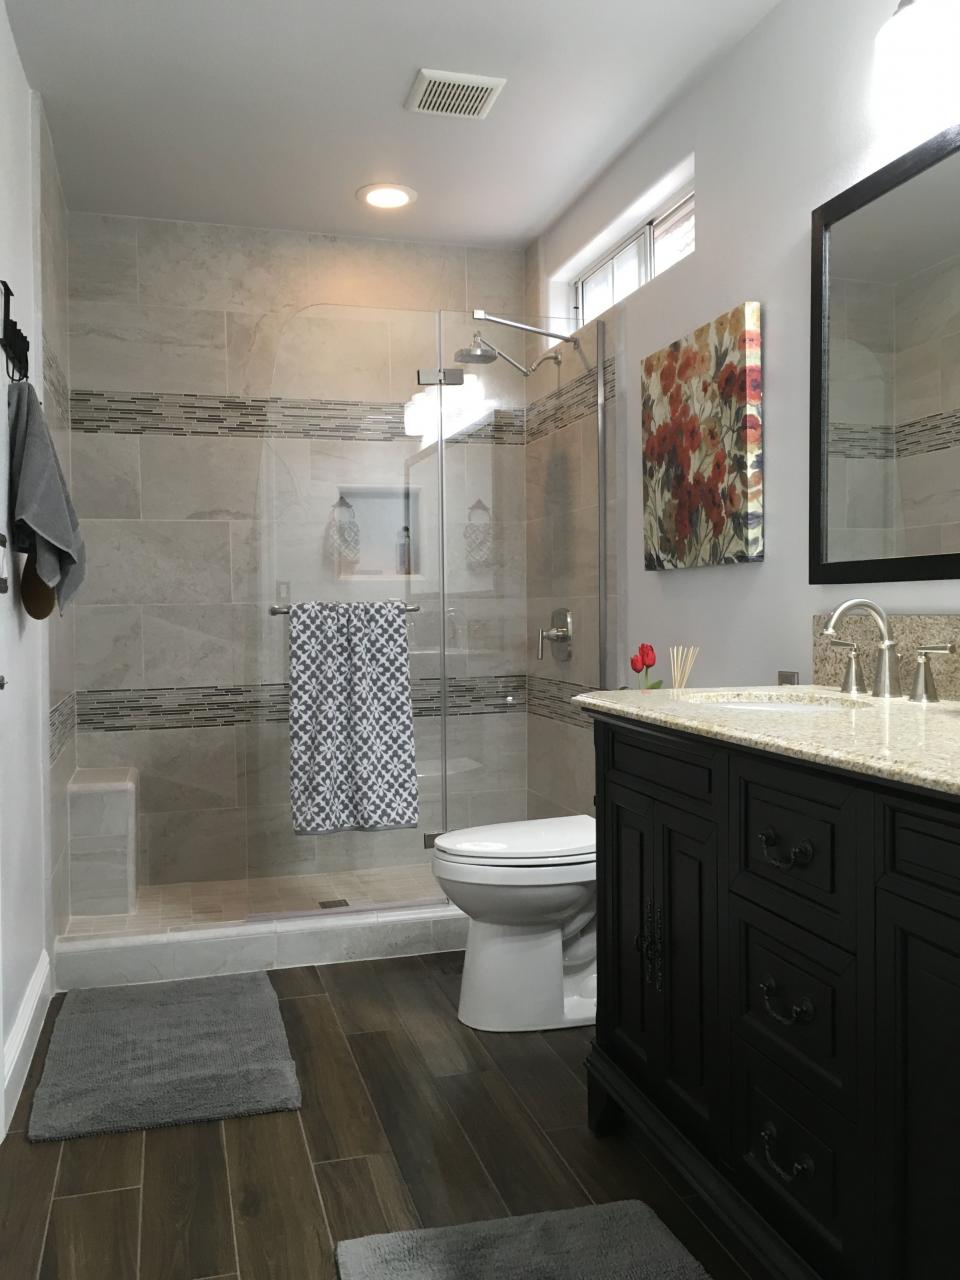 Bathtub to walk in shower conversion and remodel. Bathroom remodel